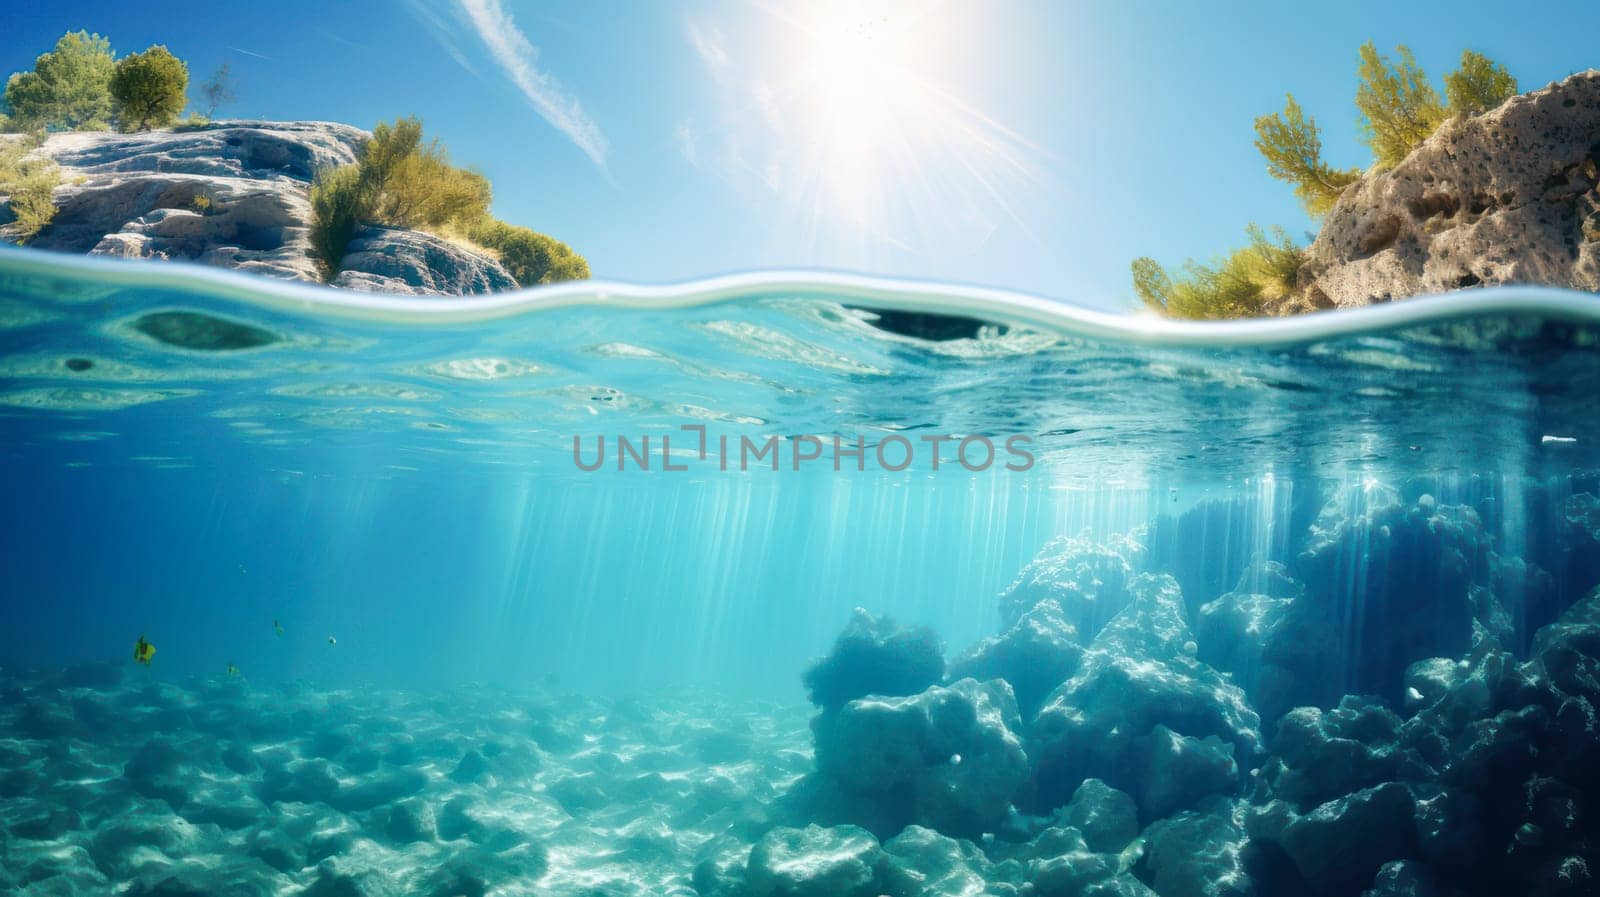 Beautiful blue underwater landscape, sky and mountains. by Alla_Yurtayeva